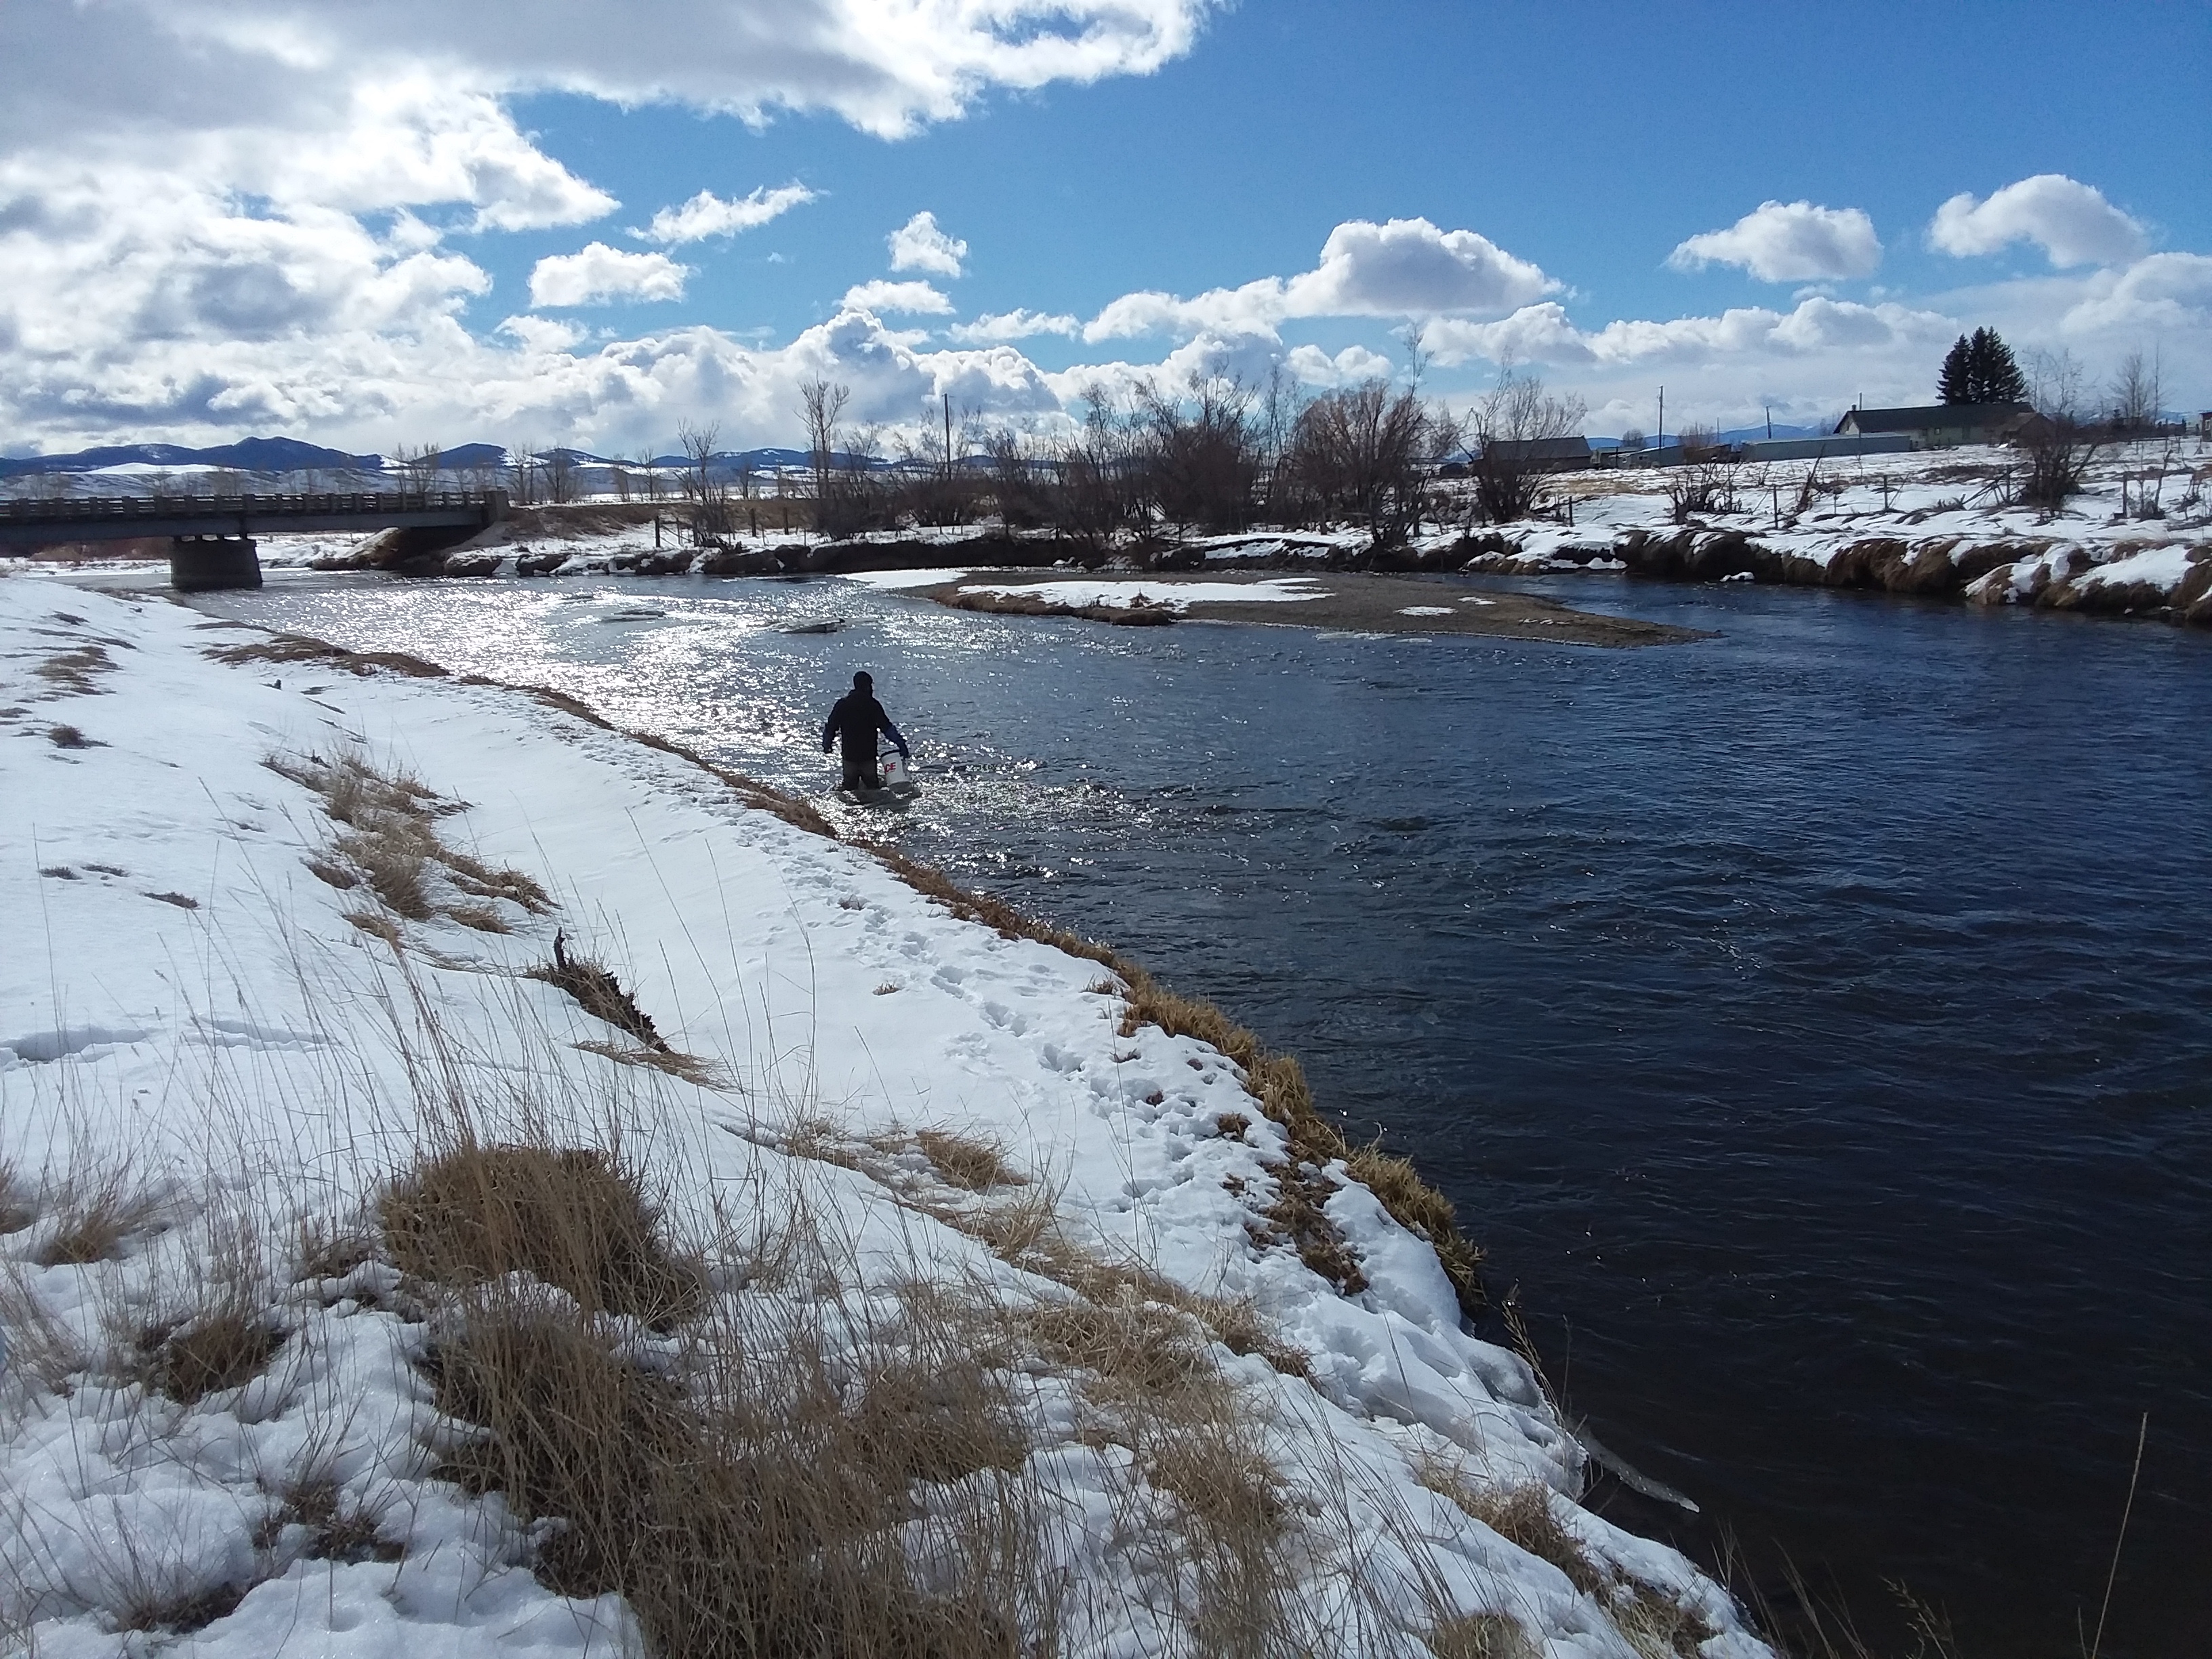 Collaborator Rafael Feijo de Lima (University of Montana) collecting samples from the Upper Clark Fork River (February 2021). Rocks were selected from the river bed and scraped for sediment and biomass collection.